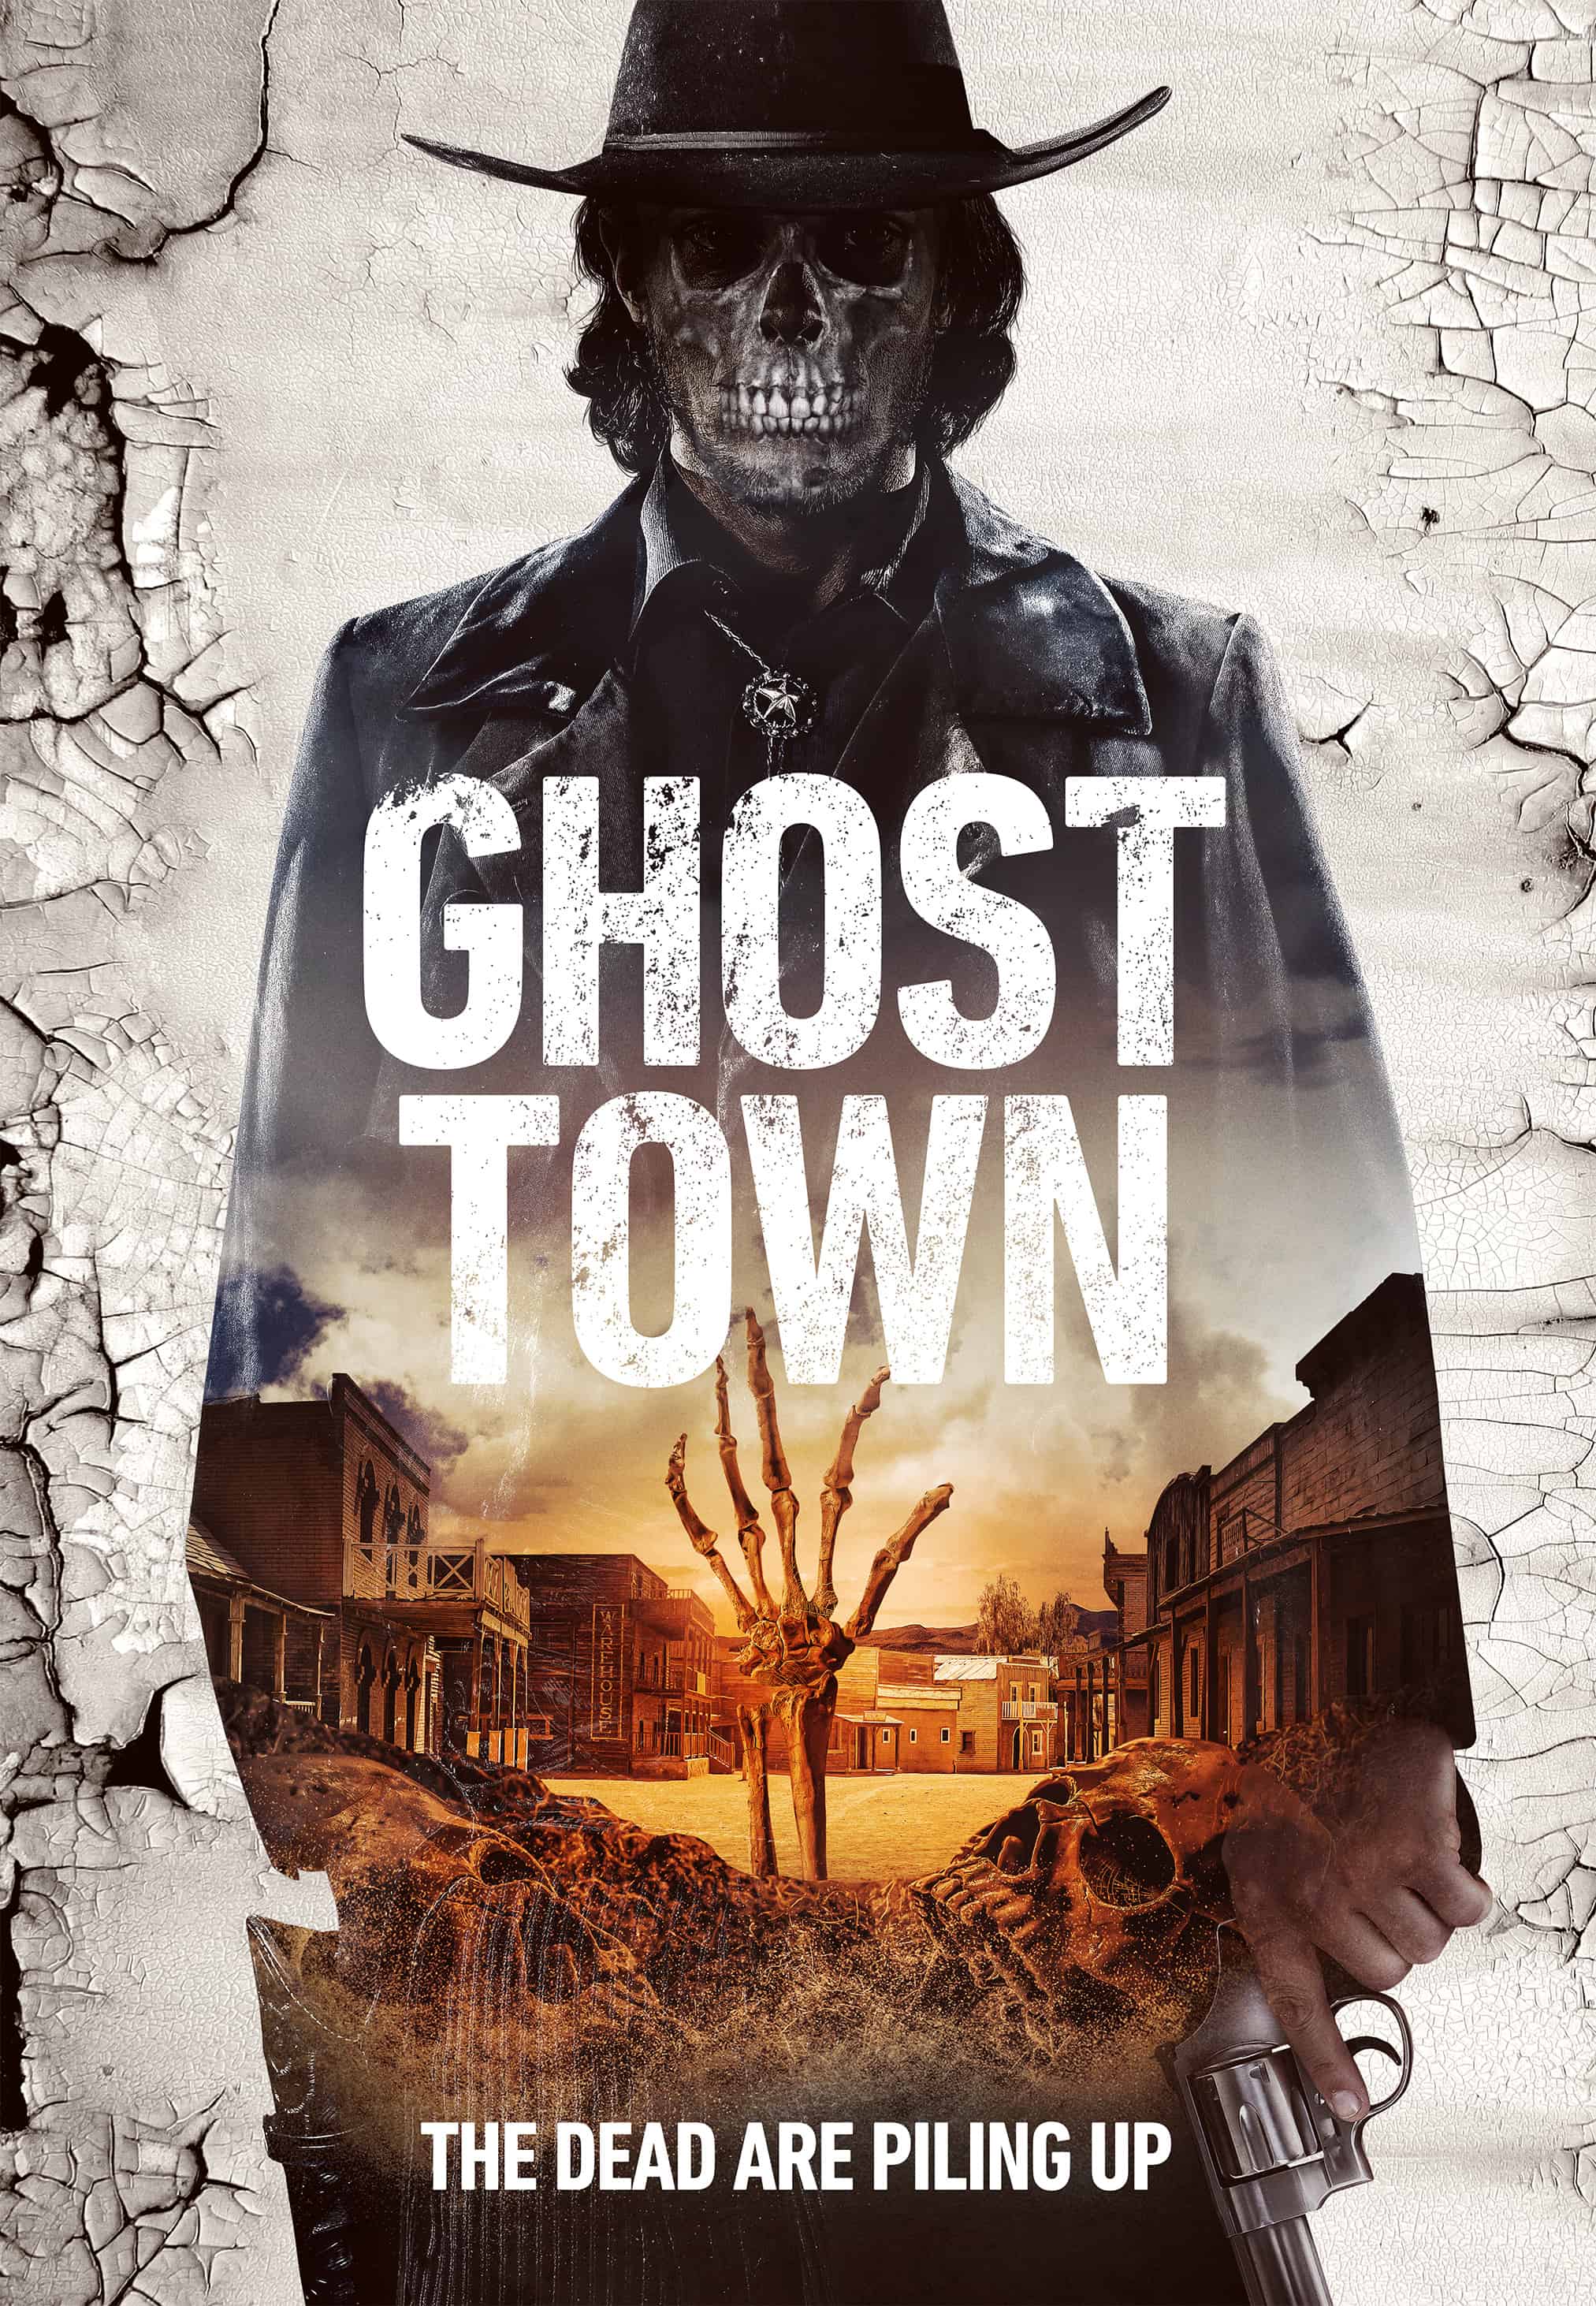 Ghost Town offers up a poster and trailer arrives March 7th 9